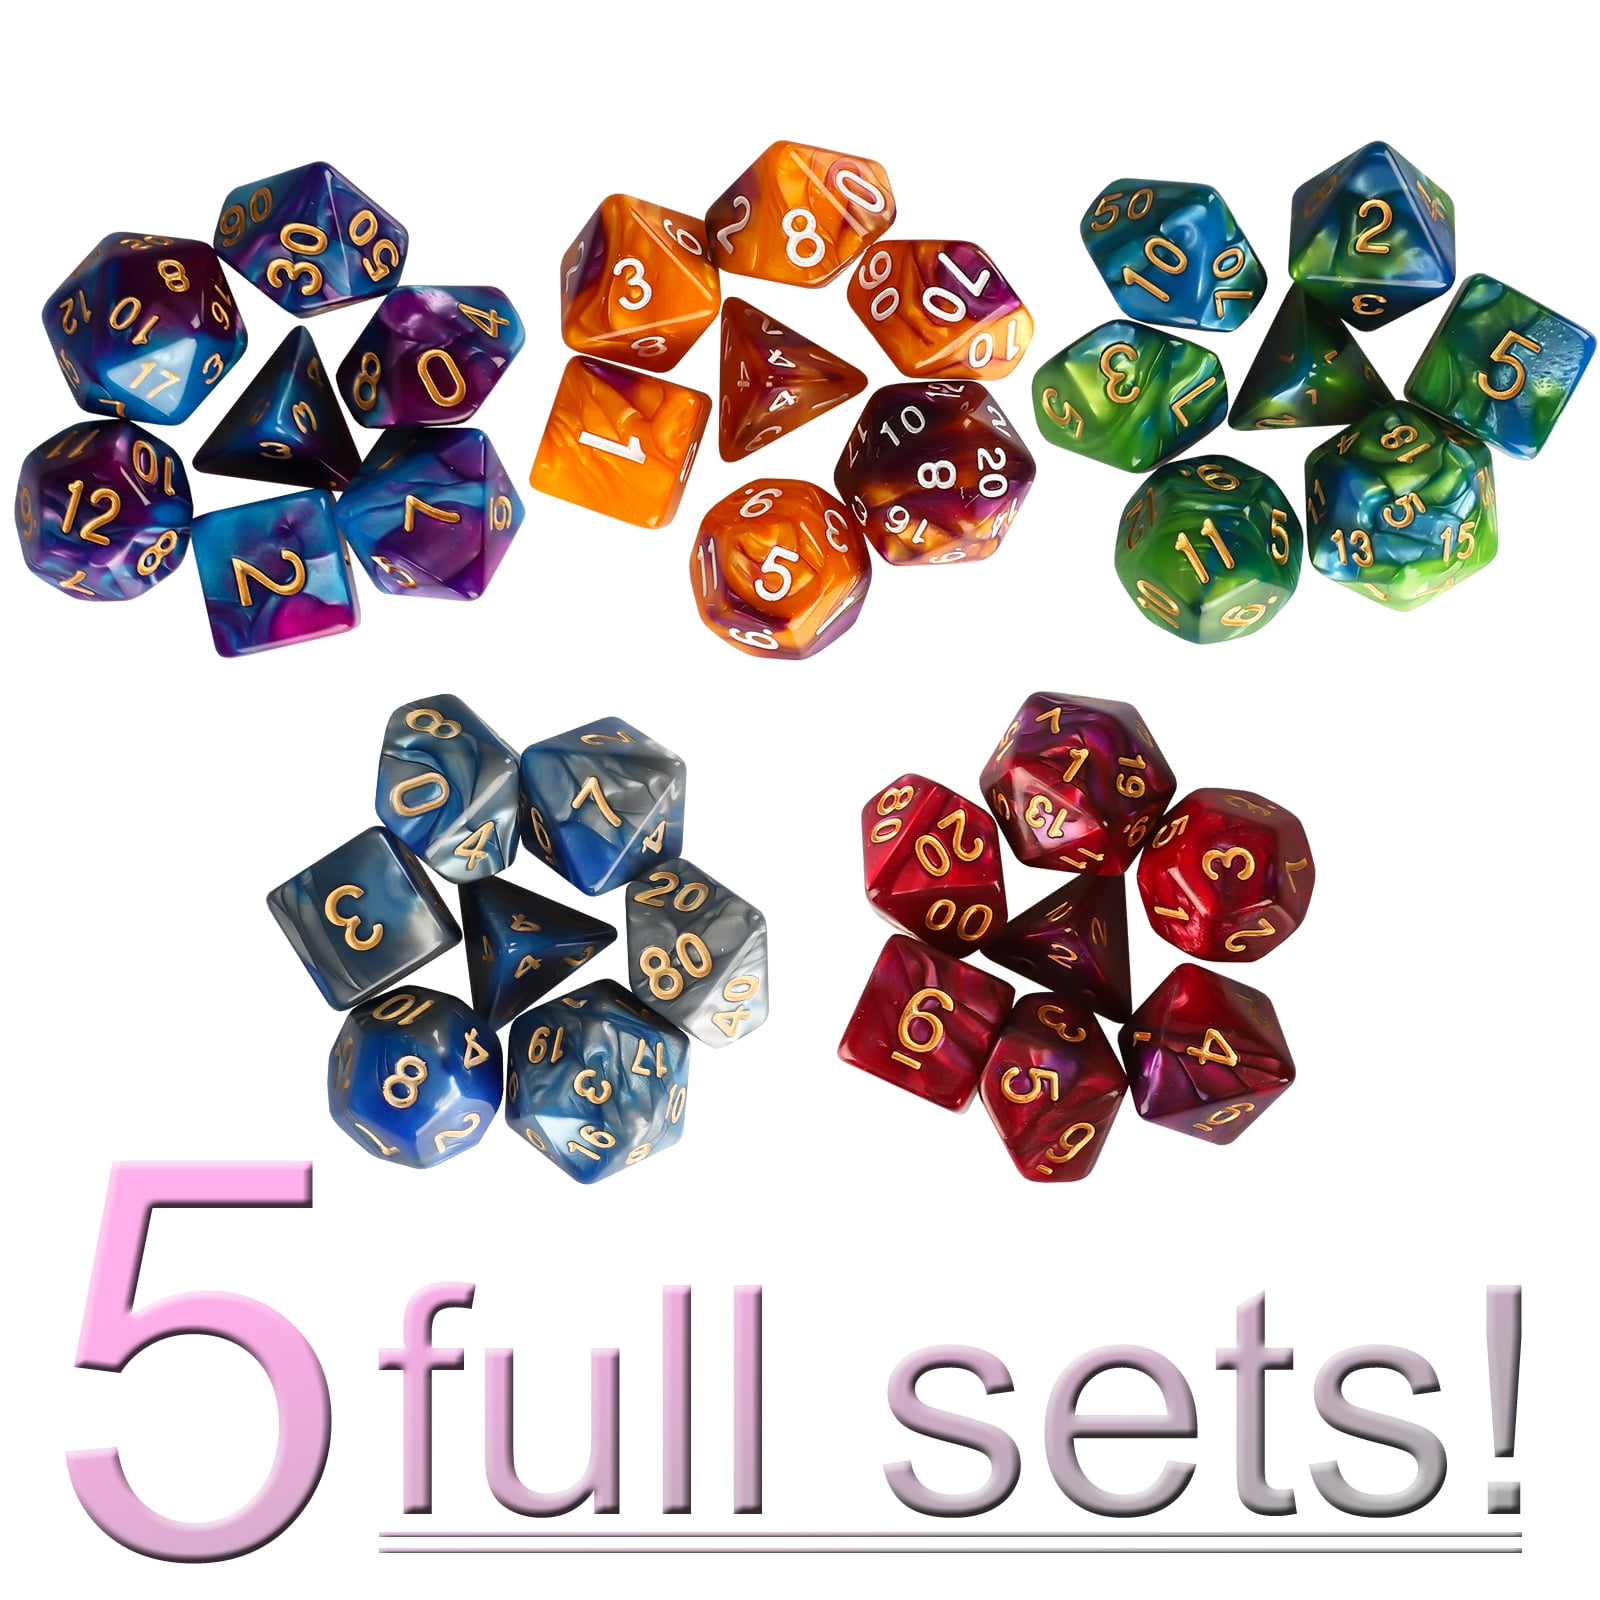 7 Pcs Polyhedral Dice Set for Dungeons and Dragons DND RPG MTG Table Games C